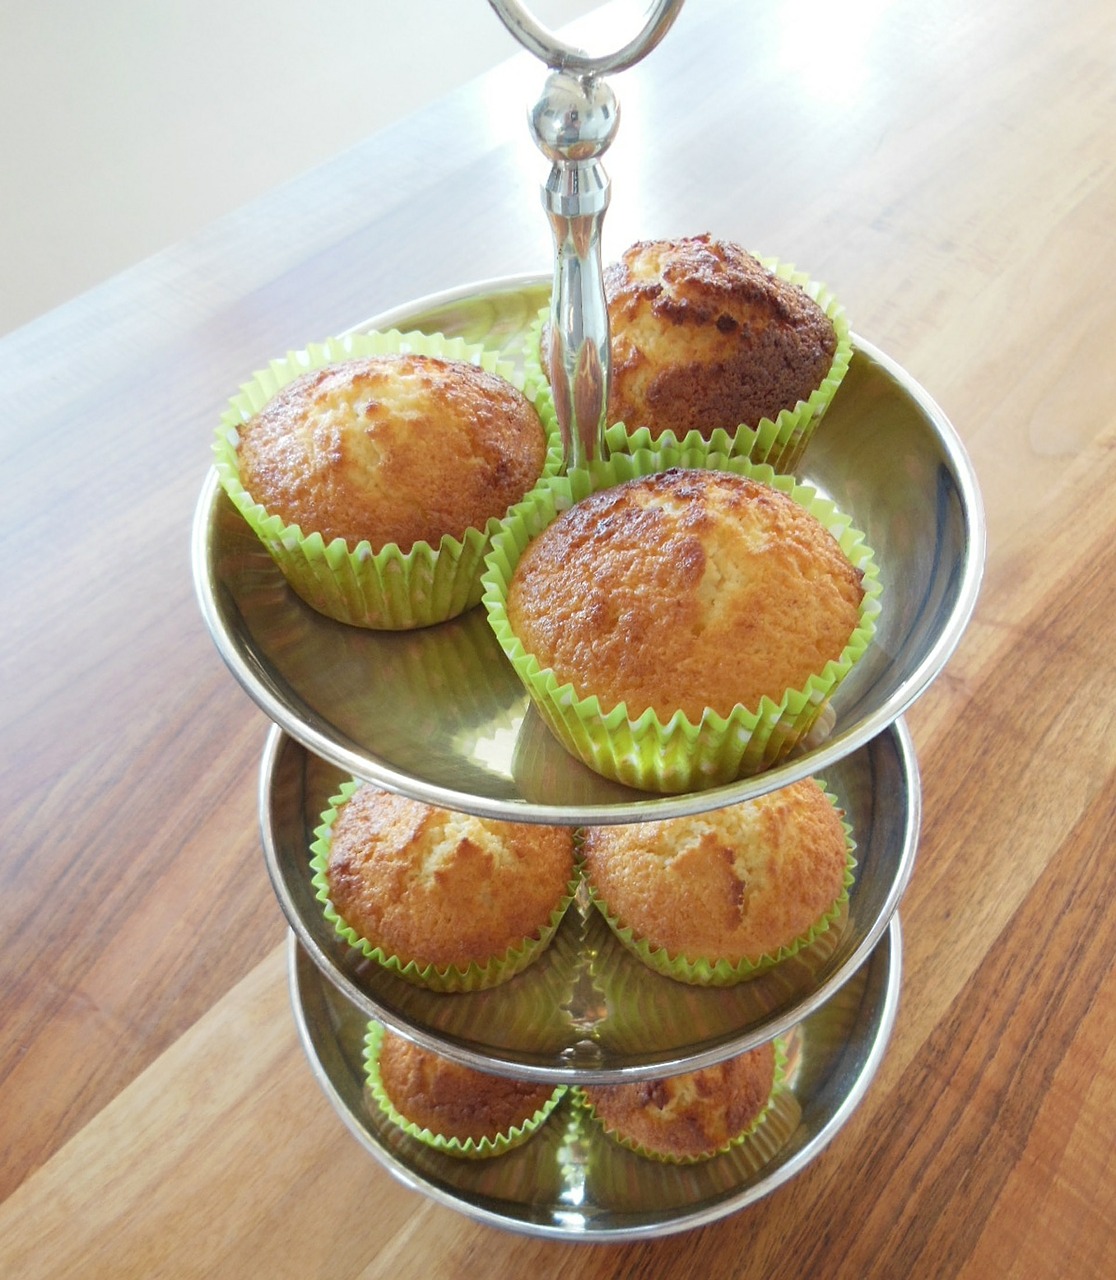 muffin delicious bake free photo